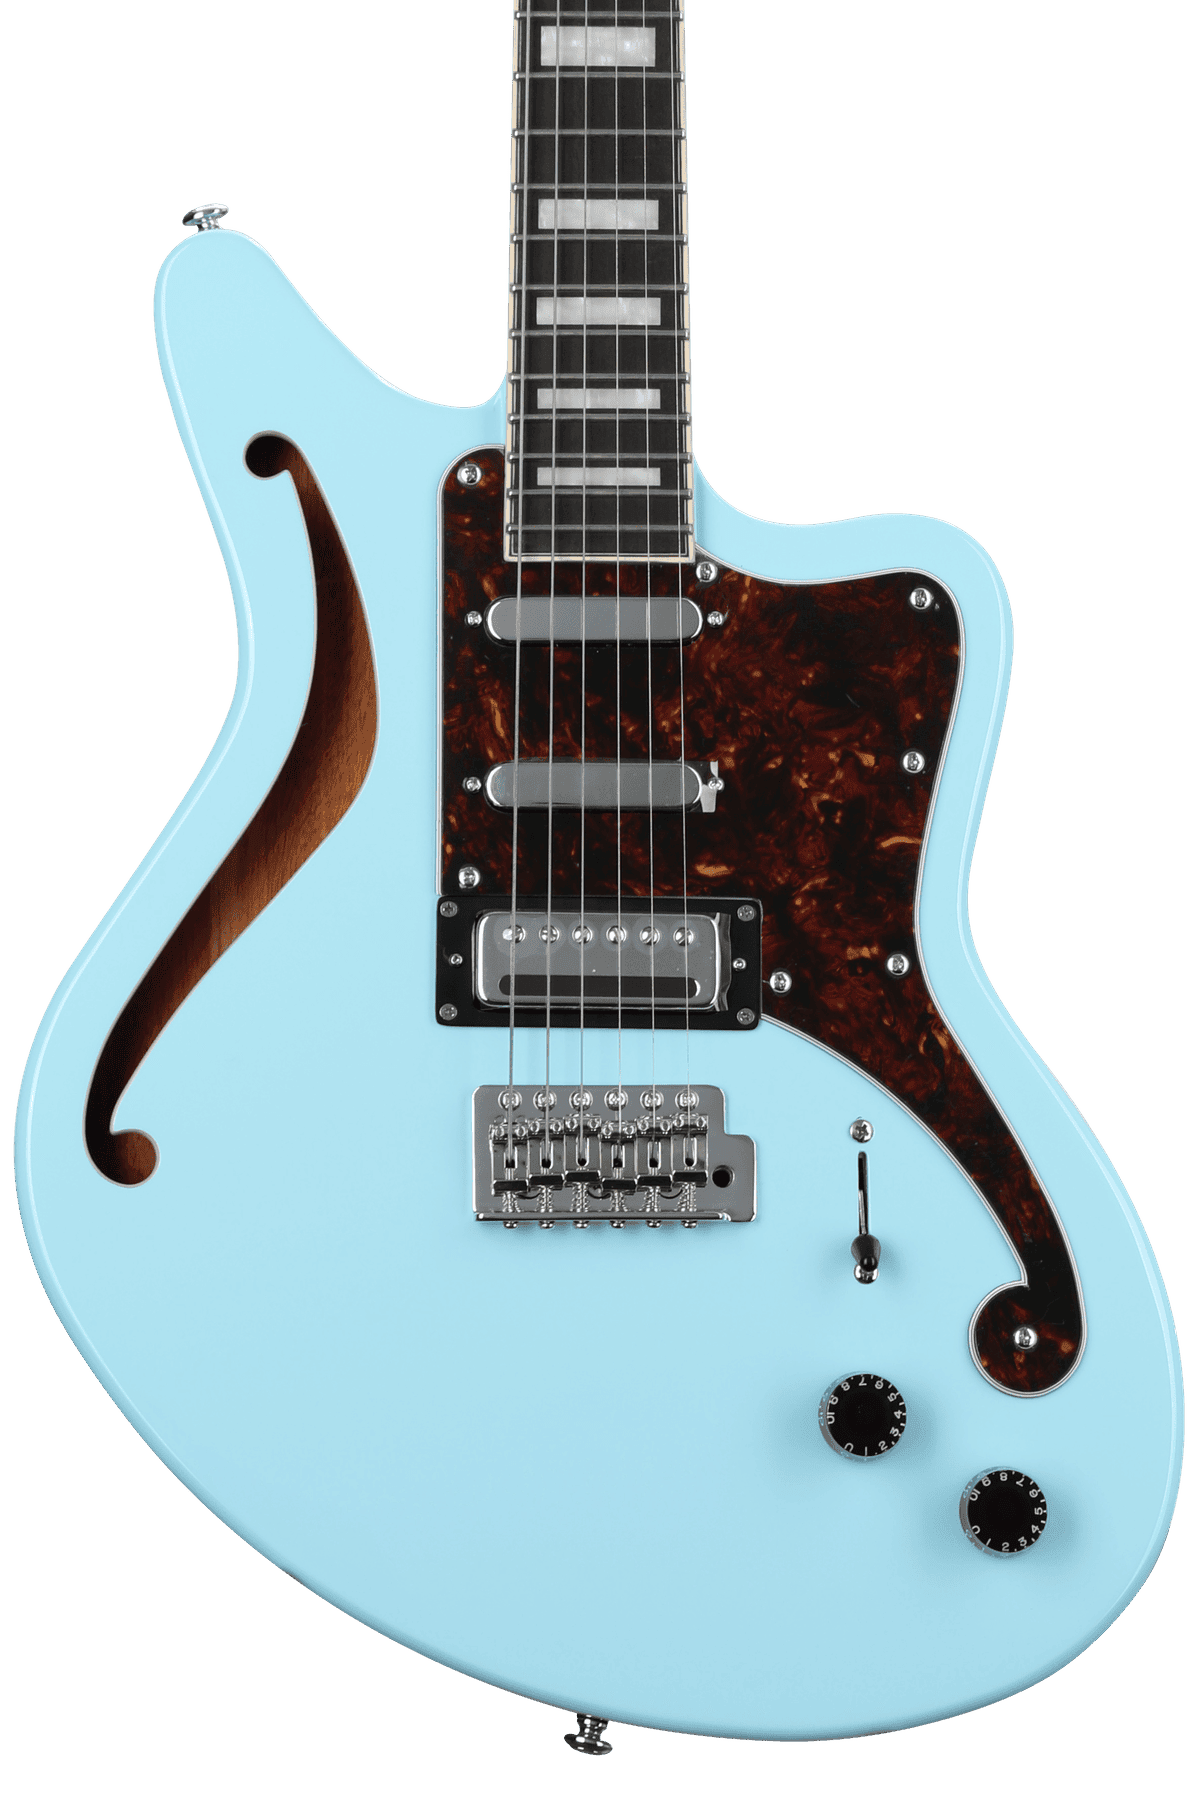 D'Angelico Premier Bedford SH Semi-hollow Electric Guitar - Sky 